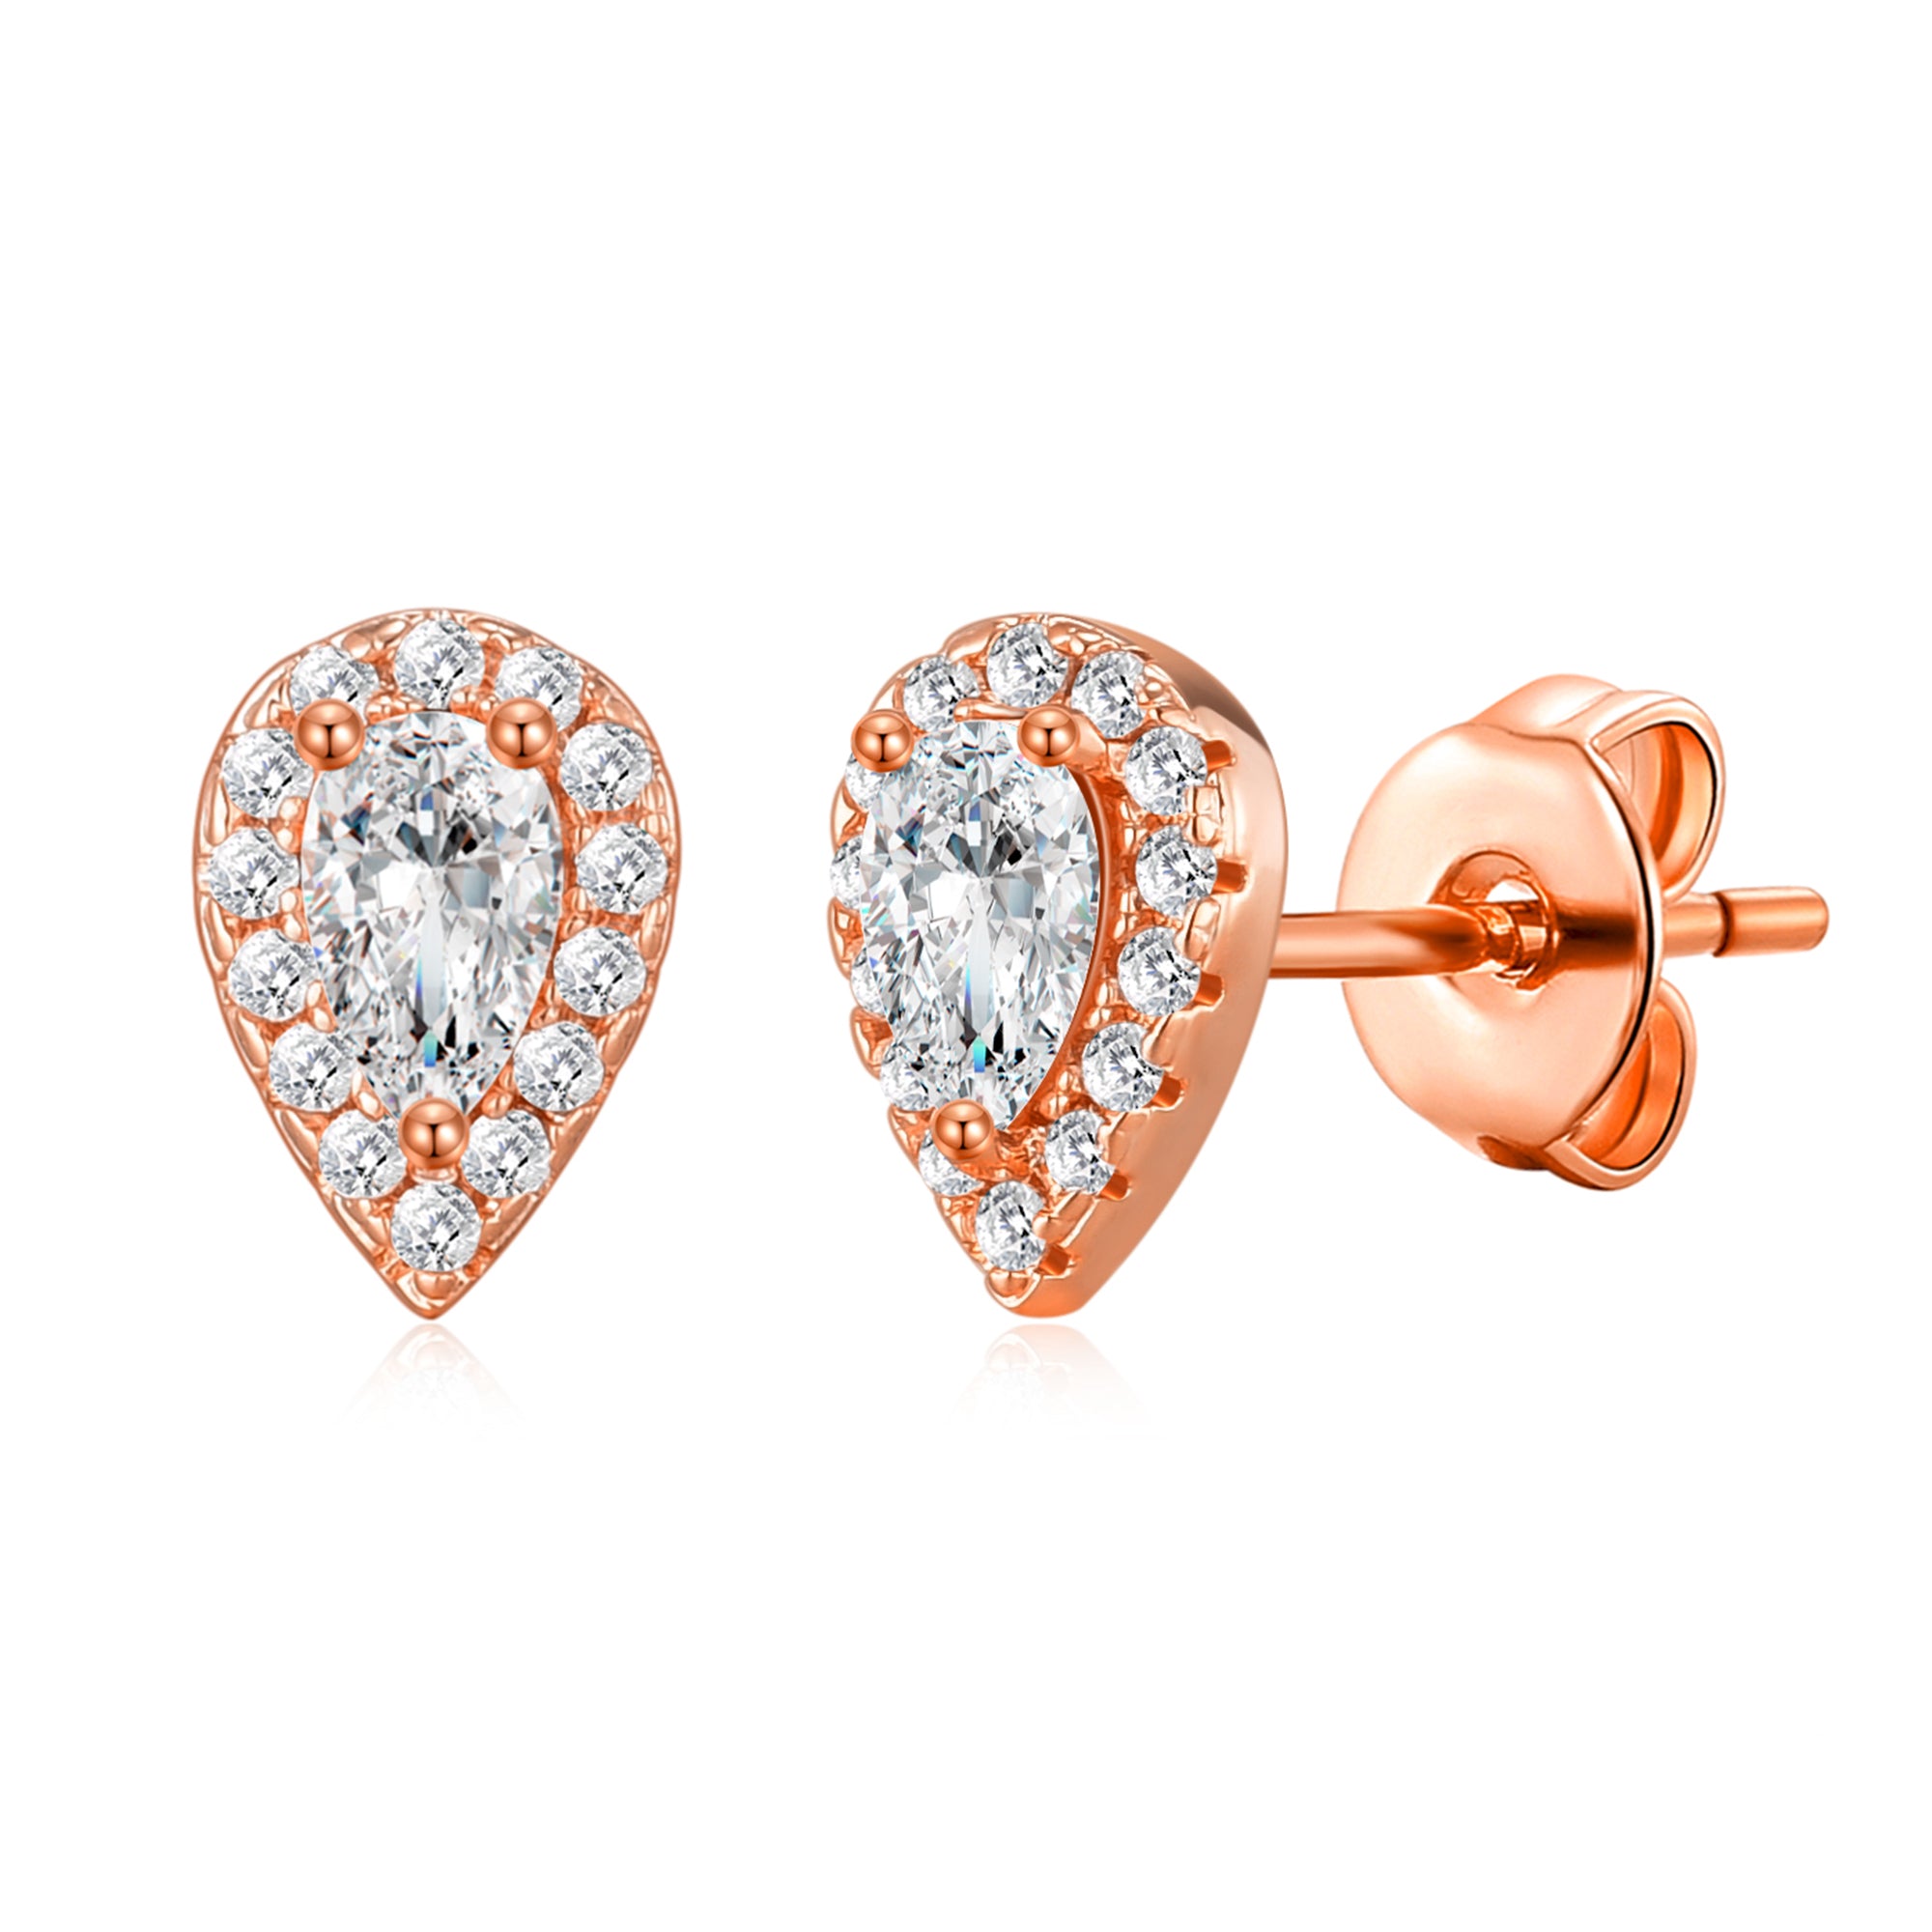 Rose Gold Plated Pear Halo Earrings Created with Zircondia® Crystals by Philip Jones Jewellery